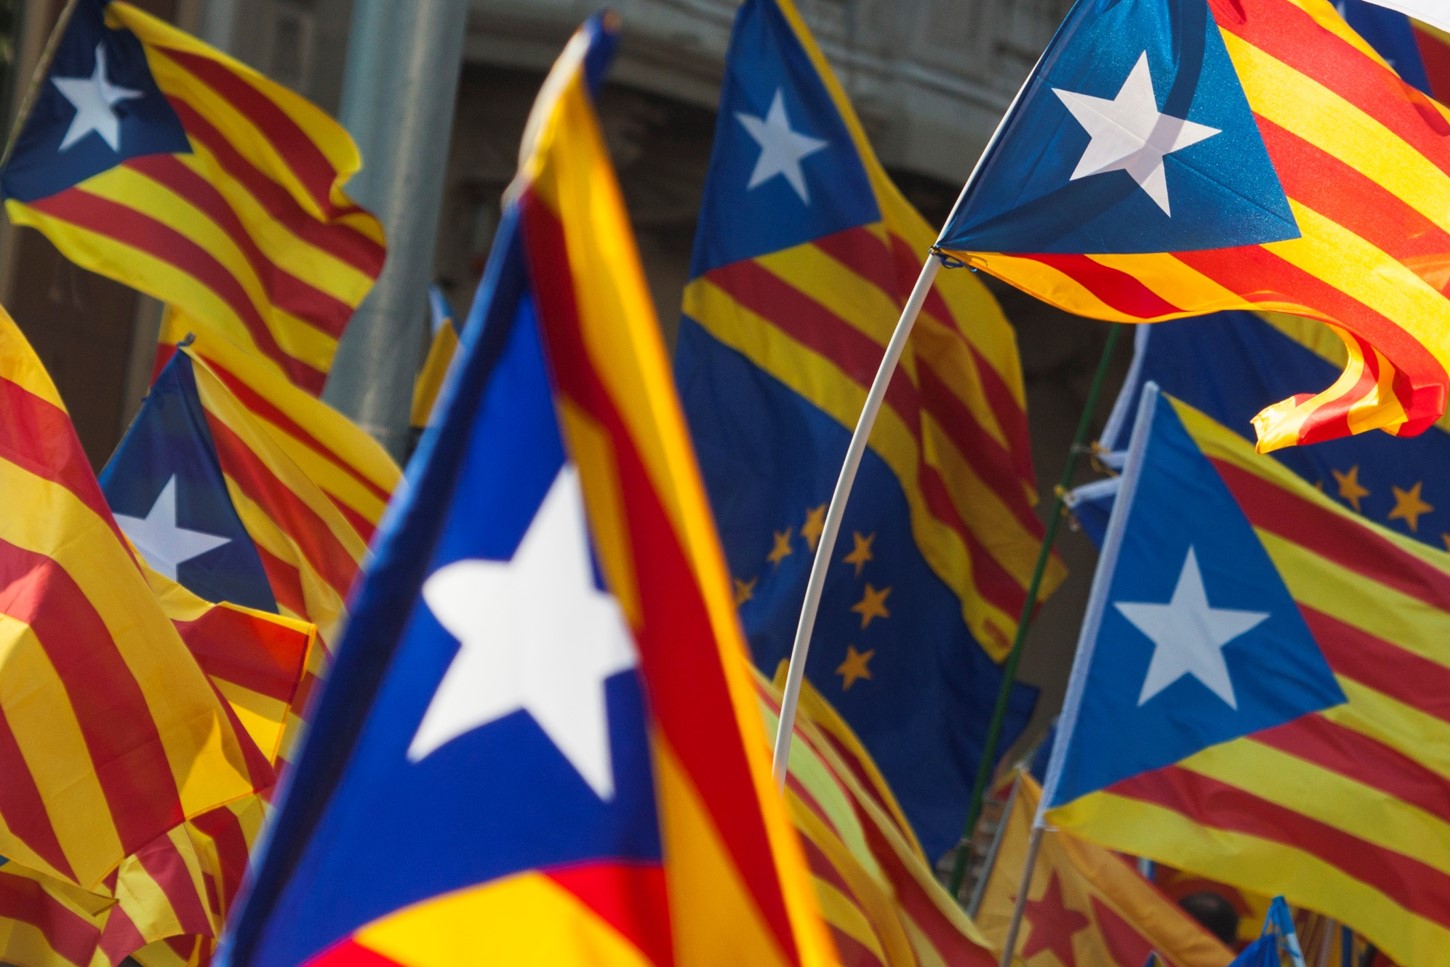 Catalonian Independence eclipses even Tory party schism